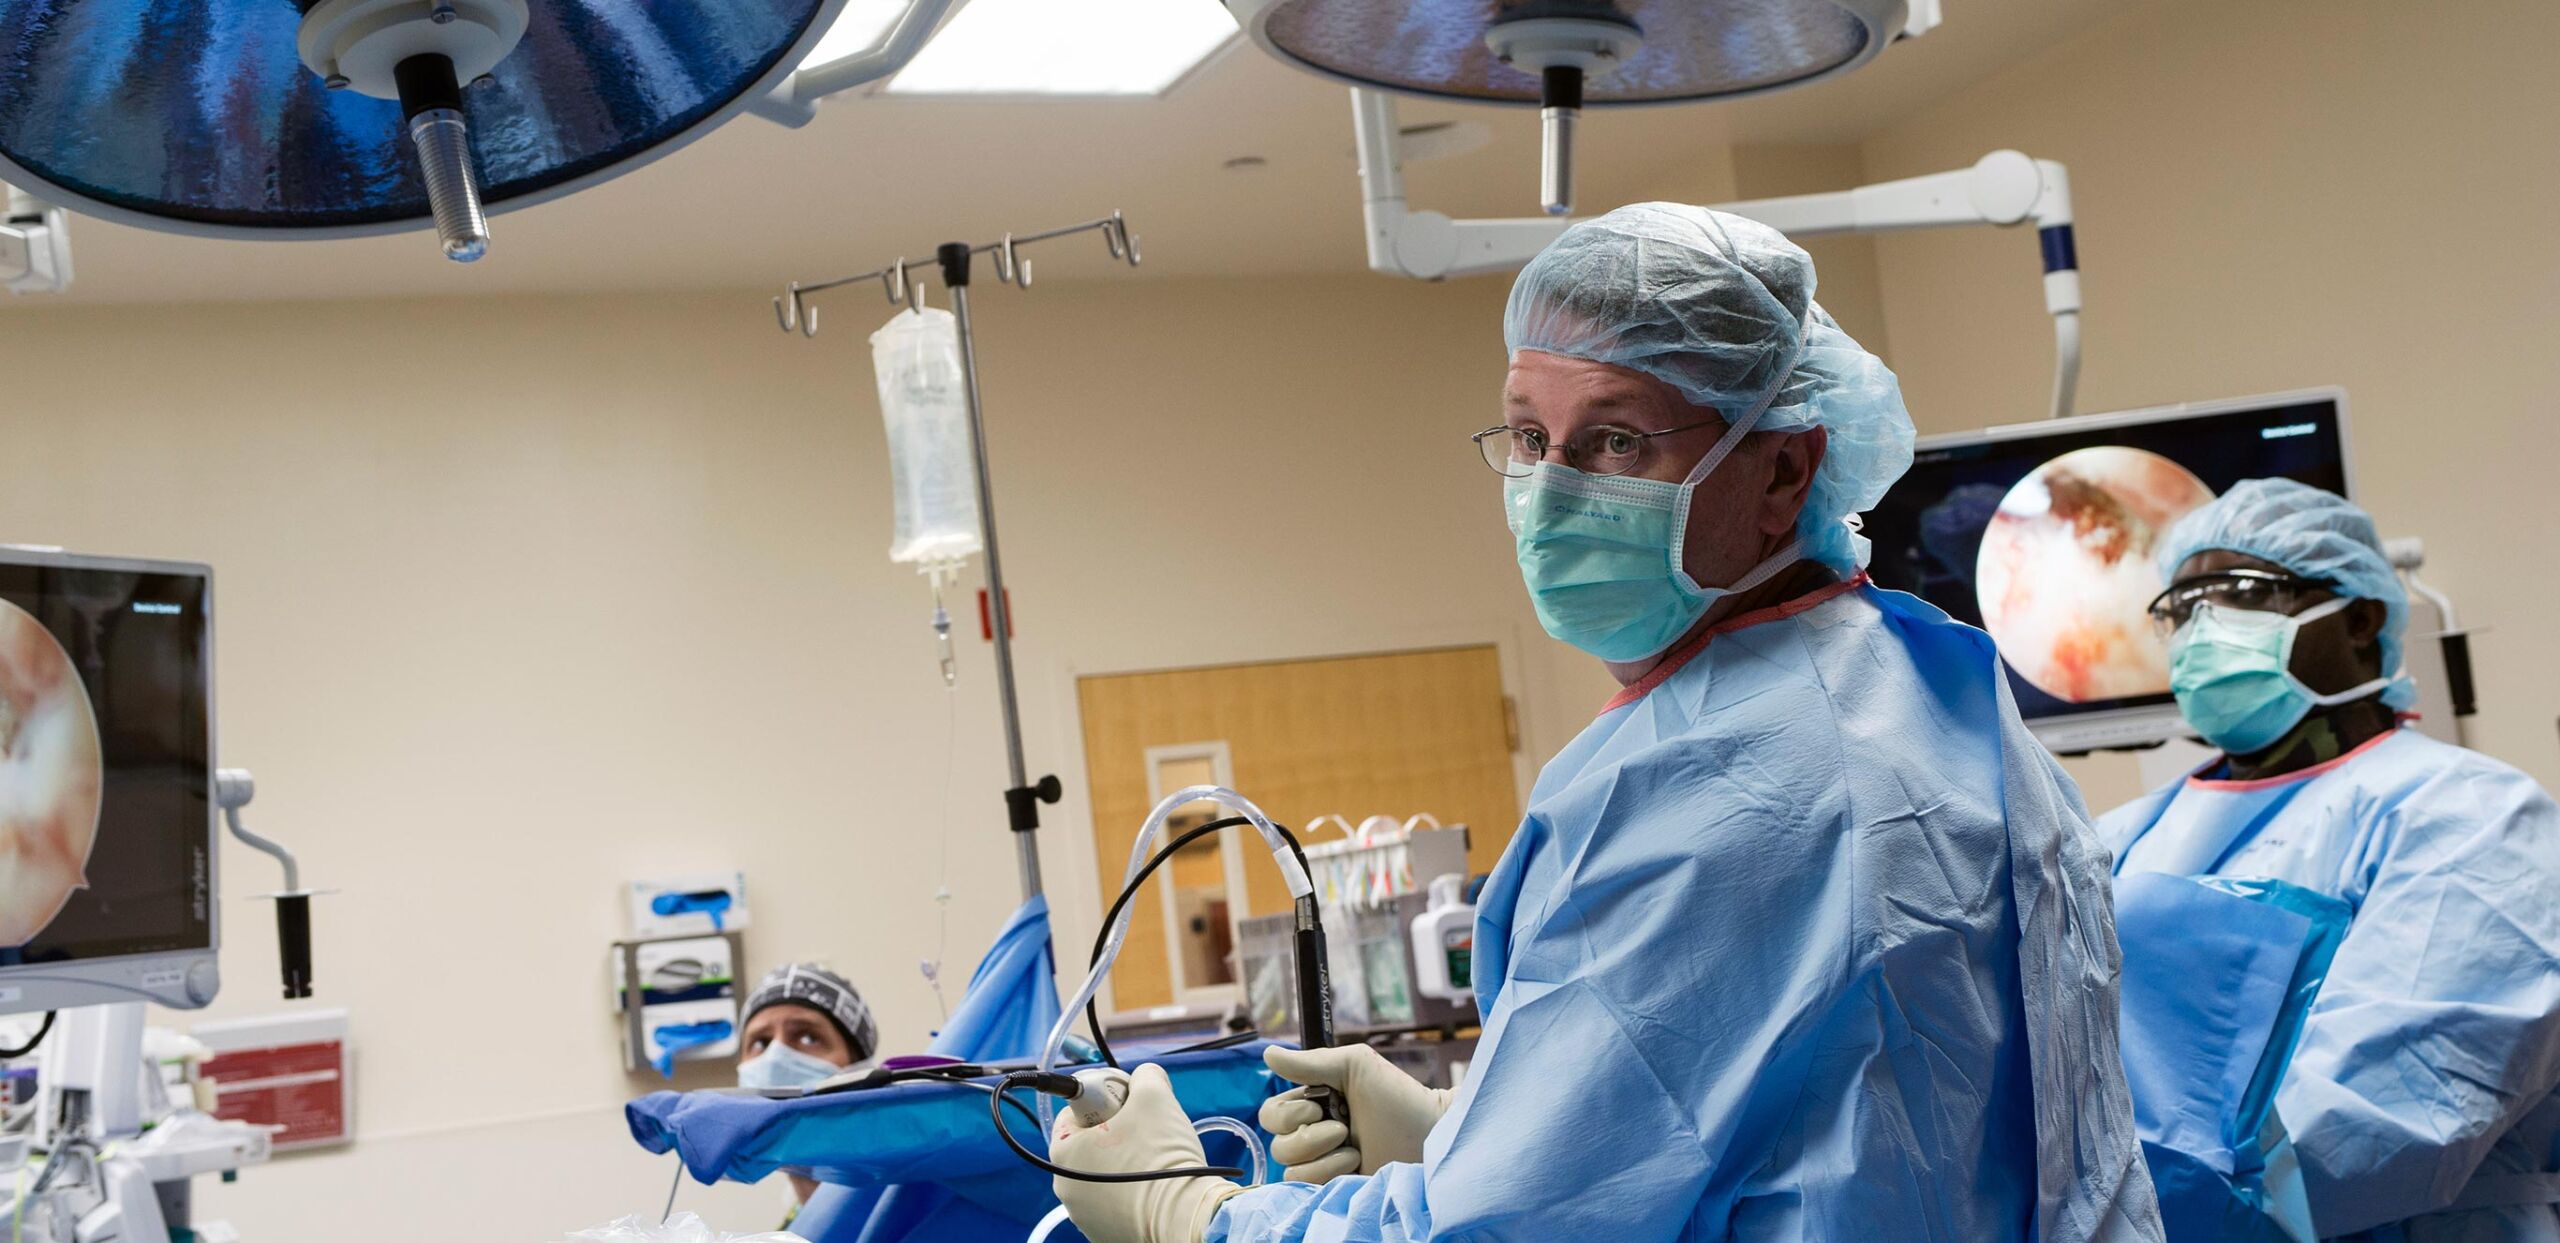 Chief of orthopedic surgery Jonathan Fallon, OD, performs procedure in the operating room of the Joint Replacement Center at Cooley Dickinson Hospital, Northampton, MA 01060